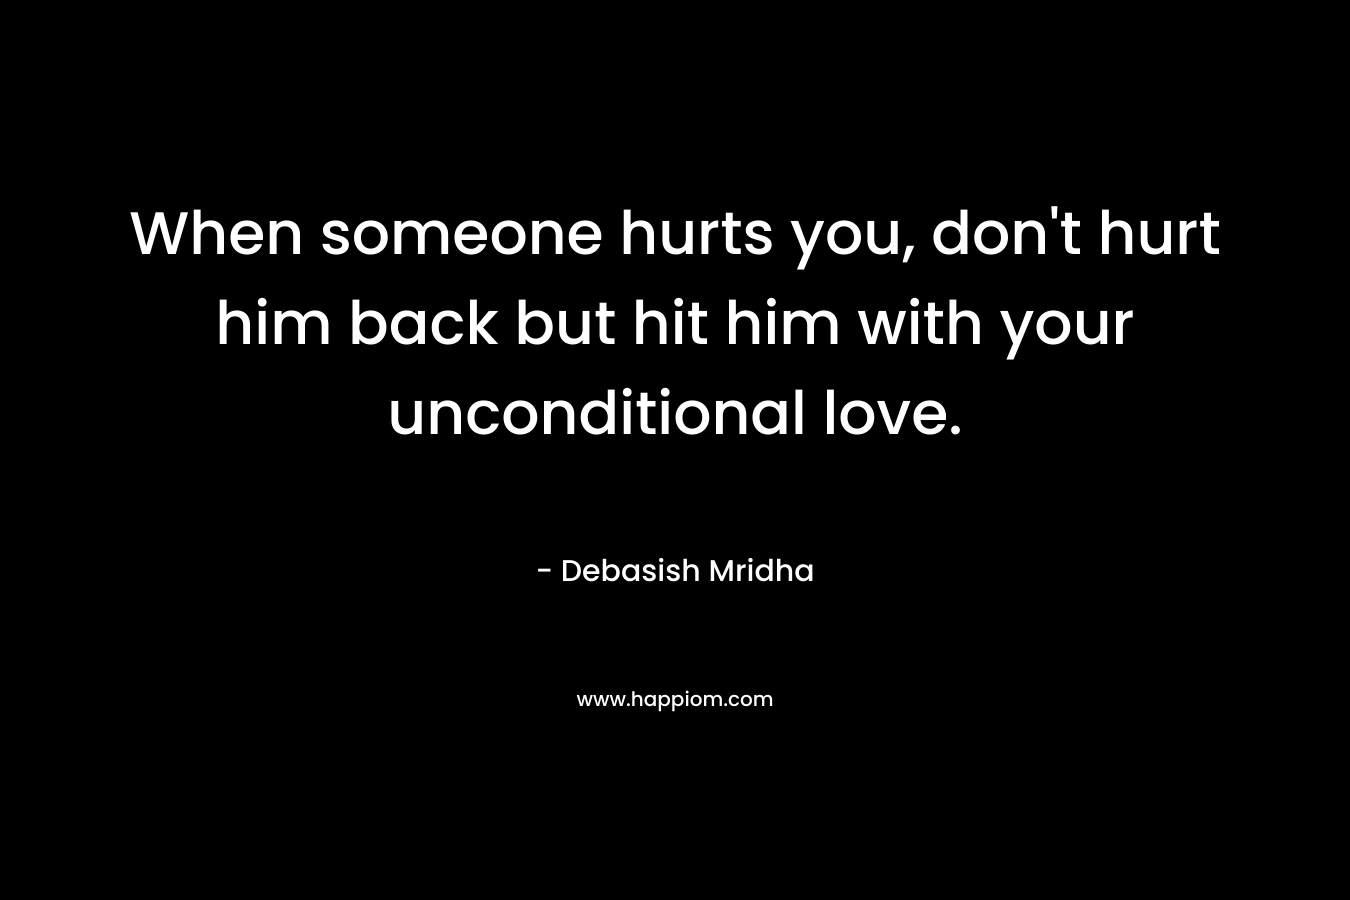 When someone hurts you, don't hurt him back but hit him with your unconditional love.